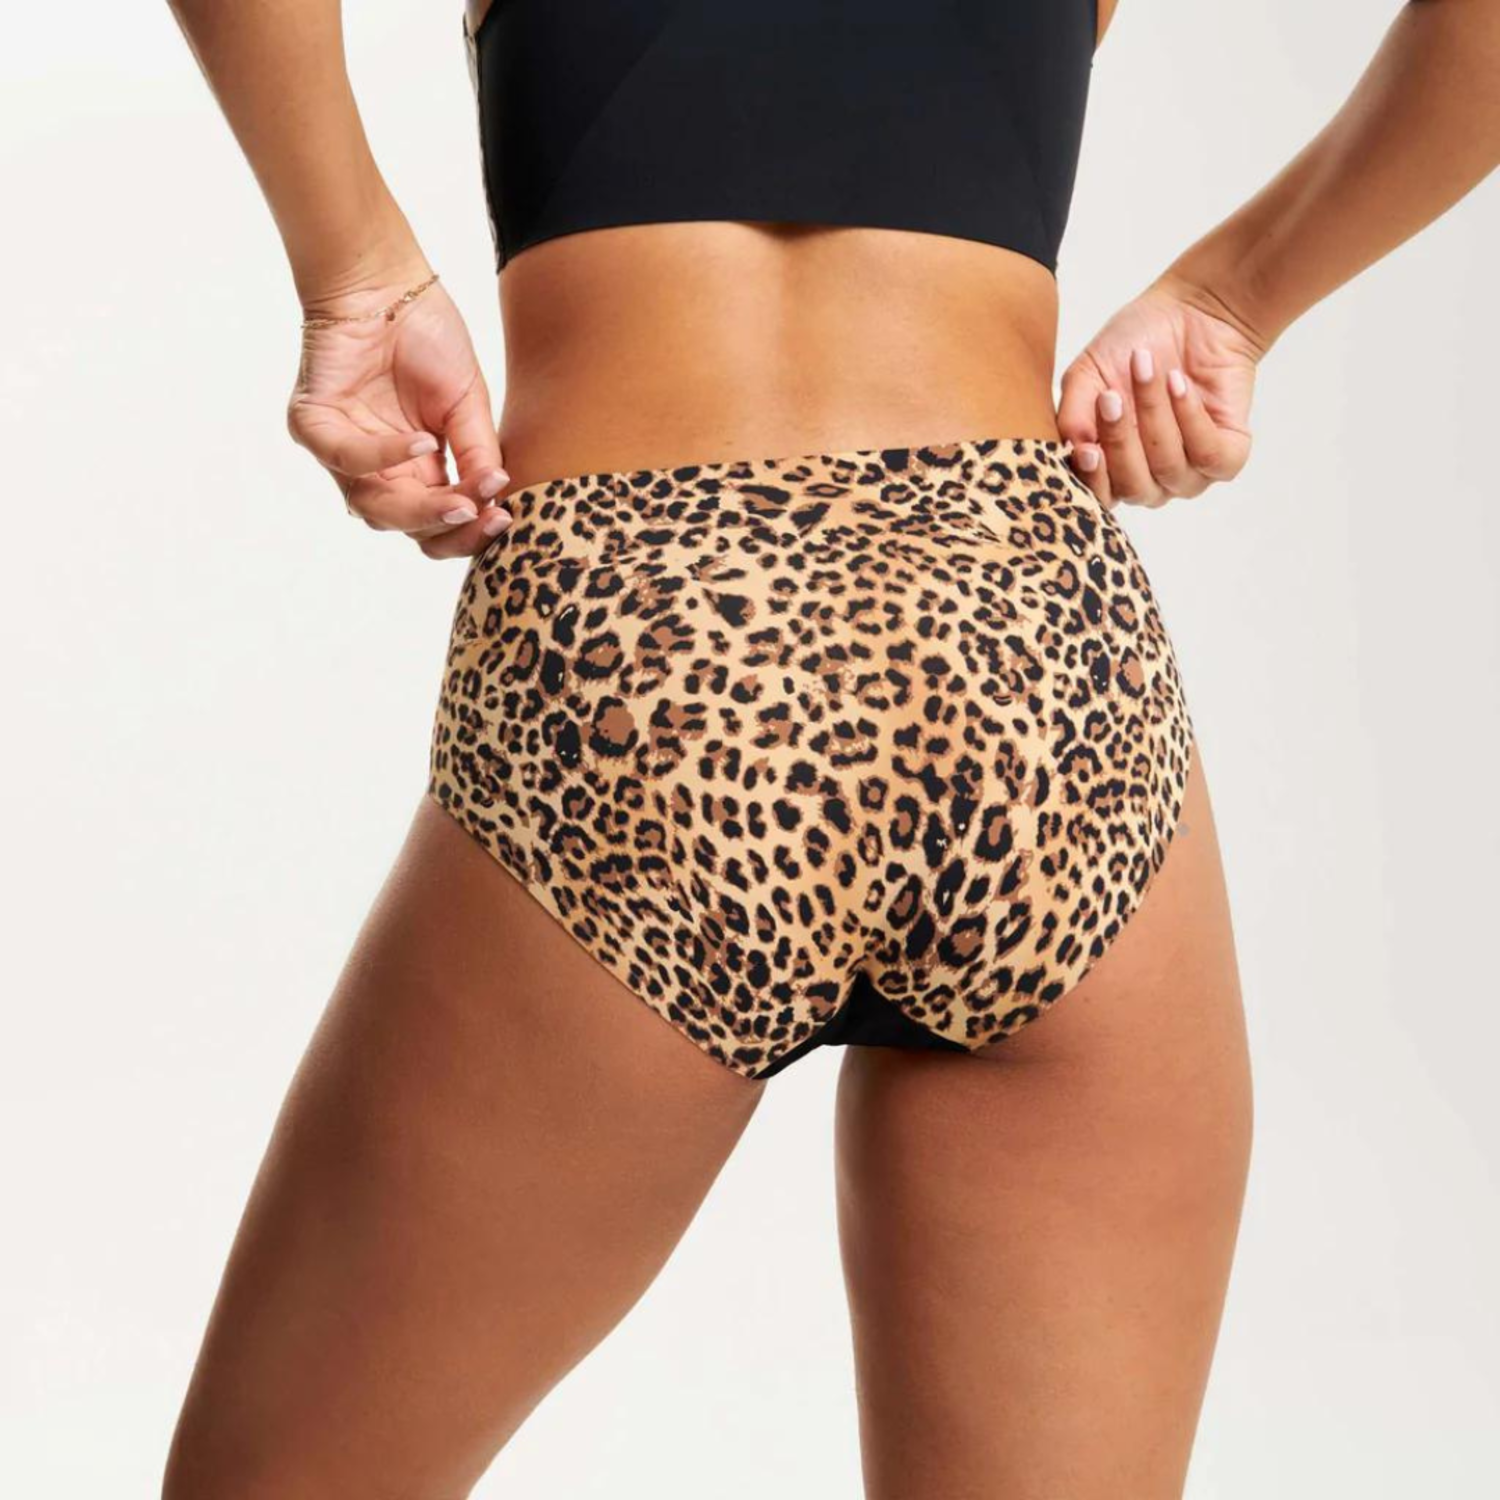 Exclusief Brutaal bunker Retro High-Rise Bikini Panty 17043211-2 Leopard - Lace & Day